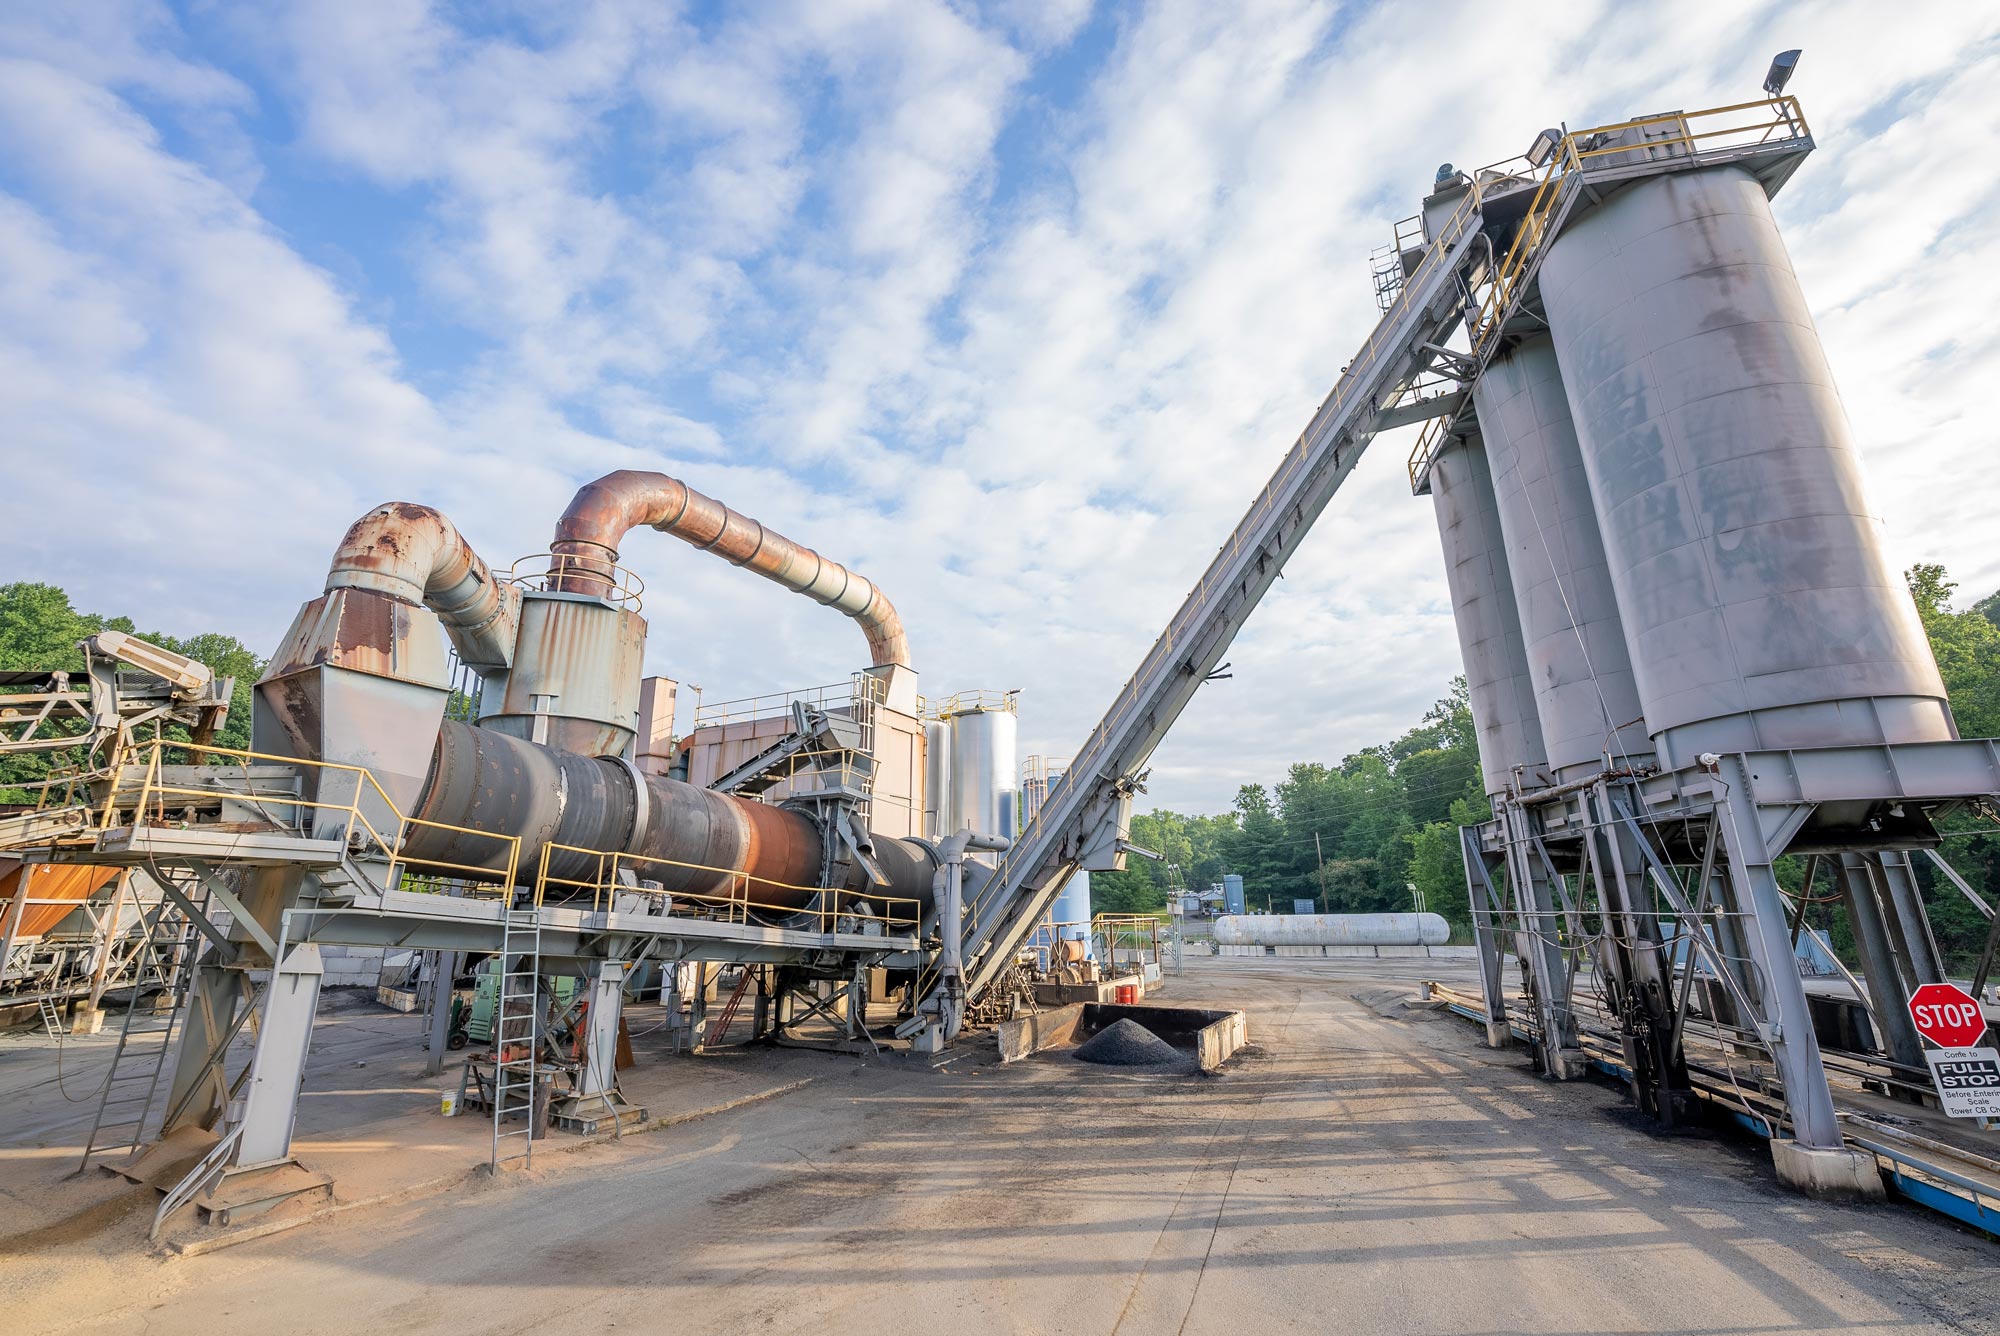 Large asphalt storage silos at a paving plant located in maryland, owned and operated by Gray & Son a leading site and development contractor in Maryland.